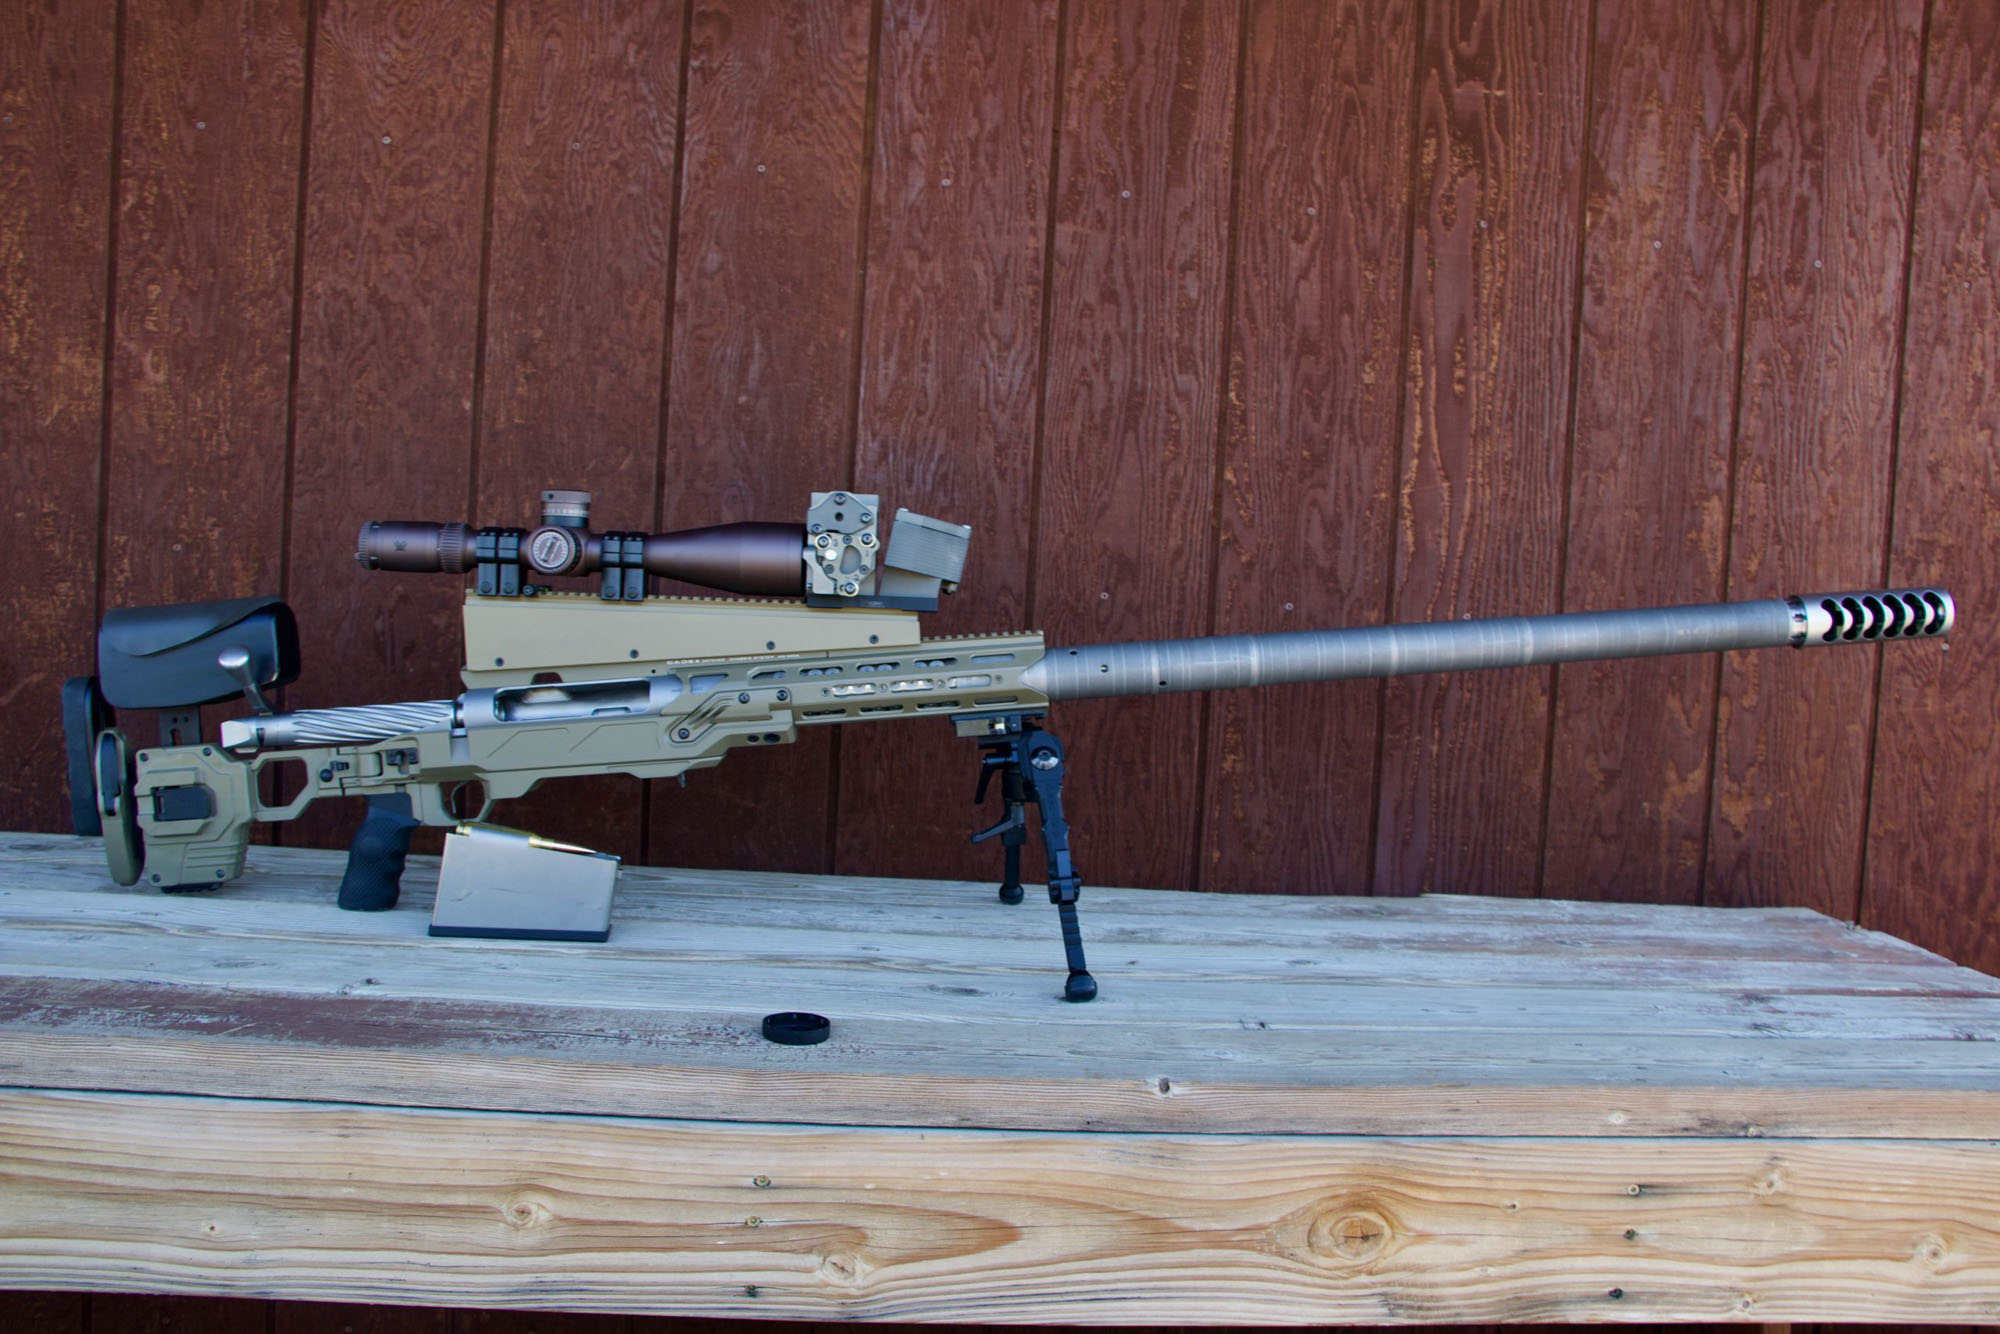 This is the rifle that set the new record for the longest hit on a target—a 4.4 mile shot using a highly customized .416 Barrett.